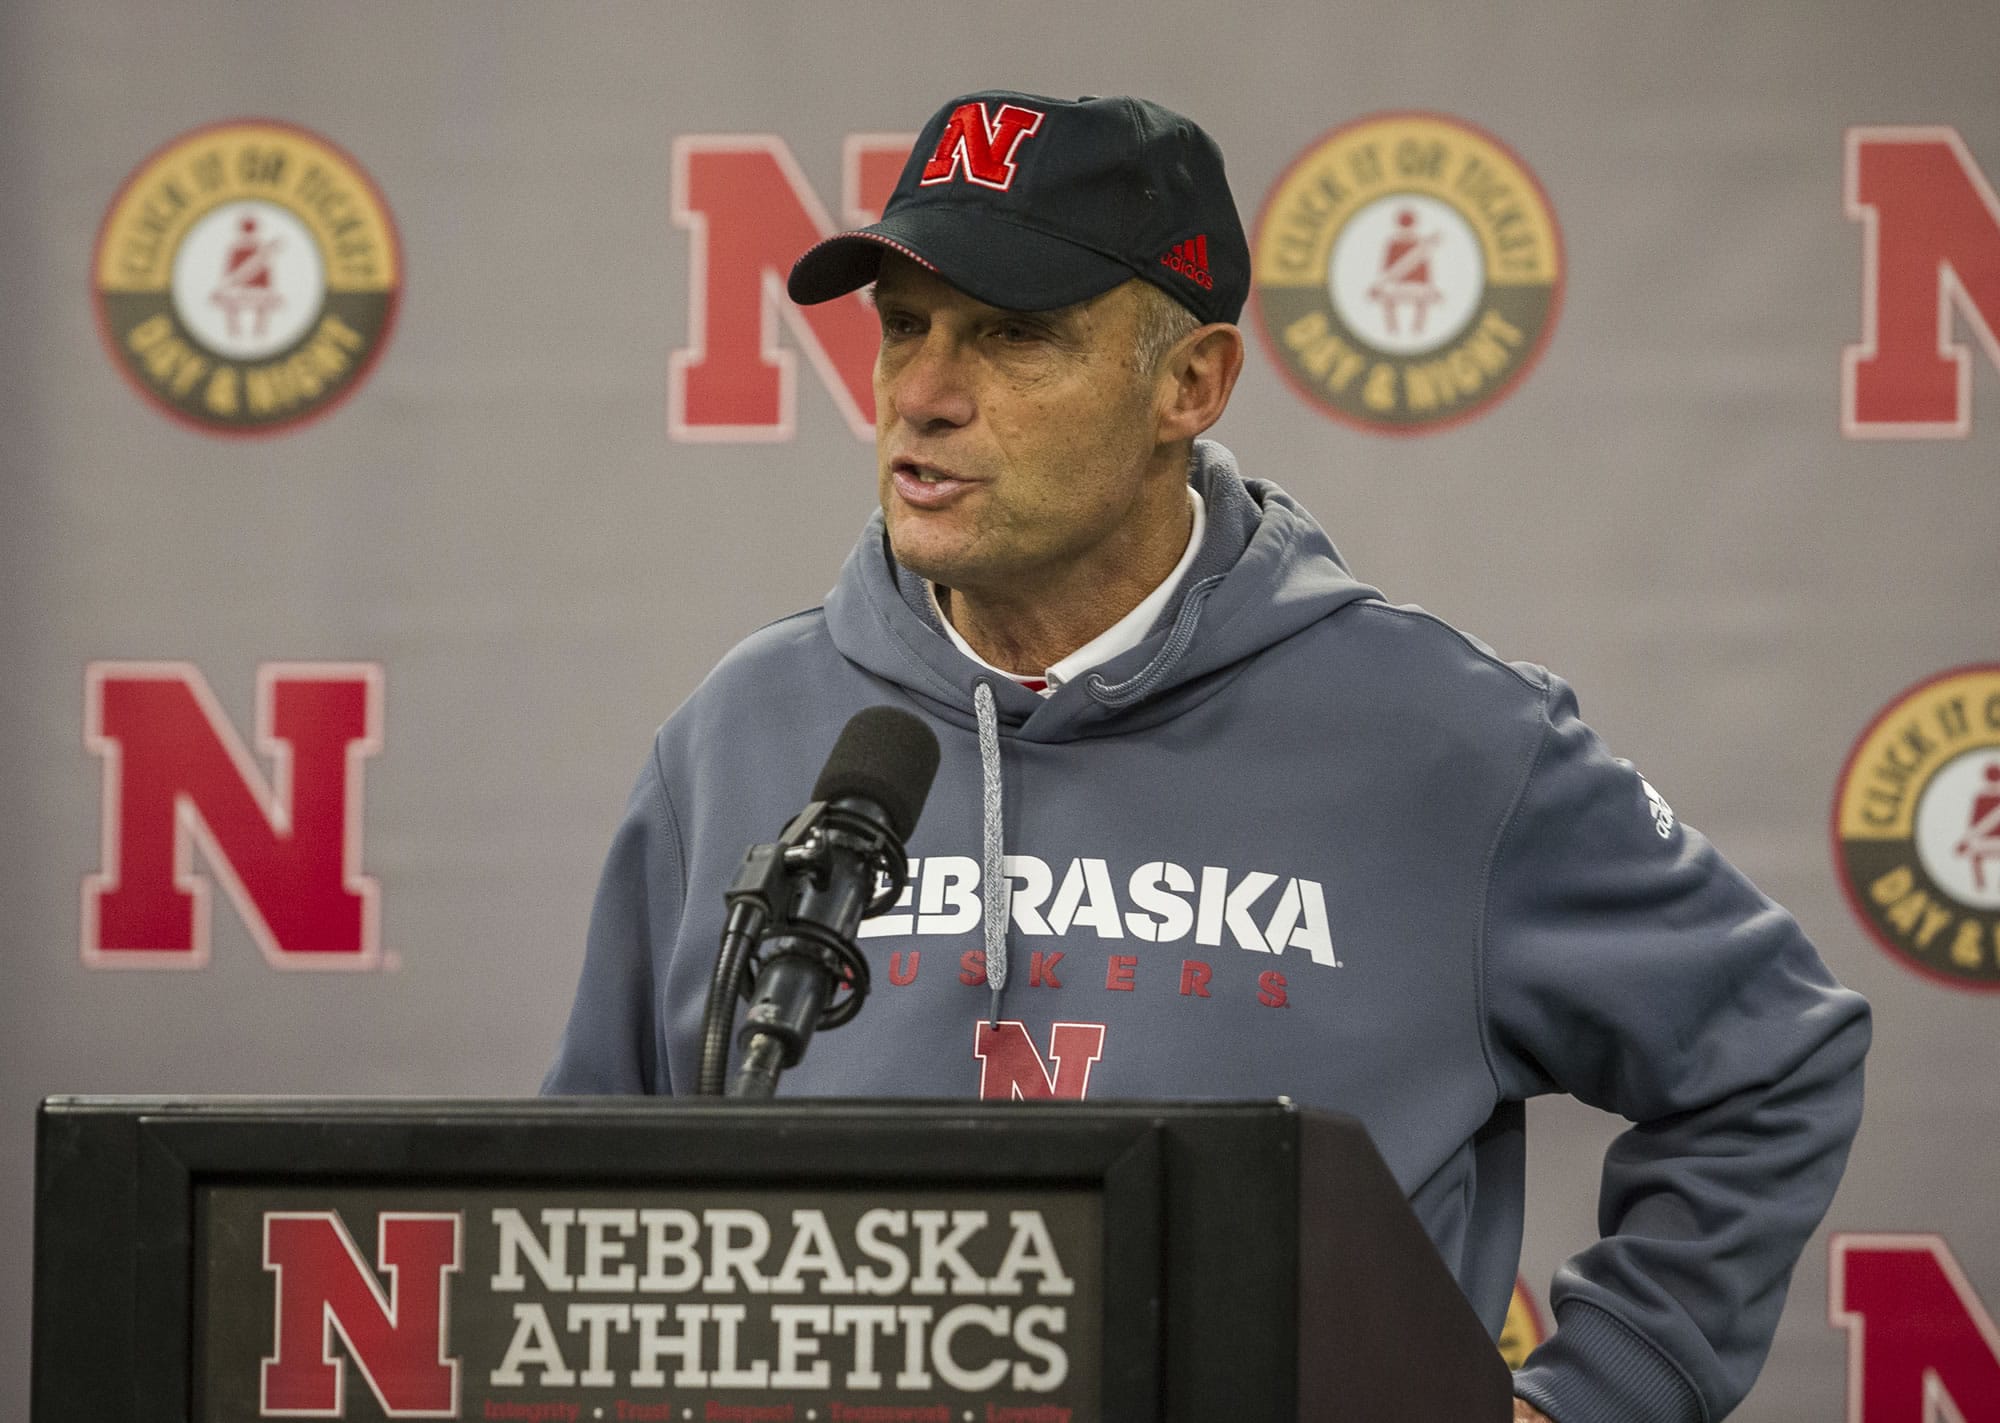 Nebraska head coach Mike Riley speaks at a news conference after suffering a loss to Iowa in an NCAA college football game in Lincoln, Neb., Friday, Nov. 24, 2017.